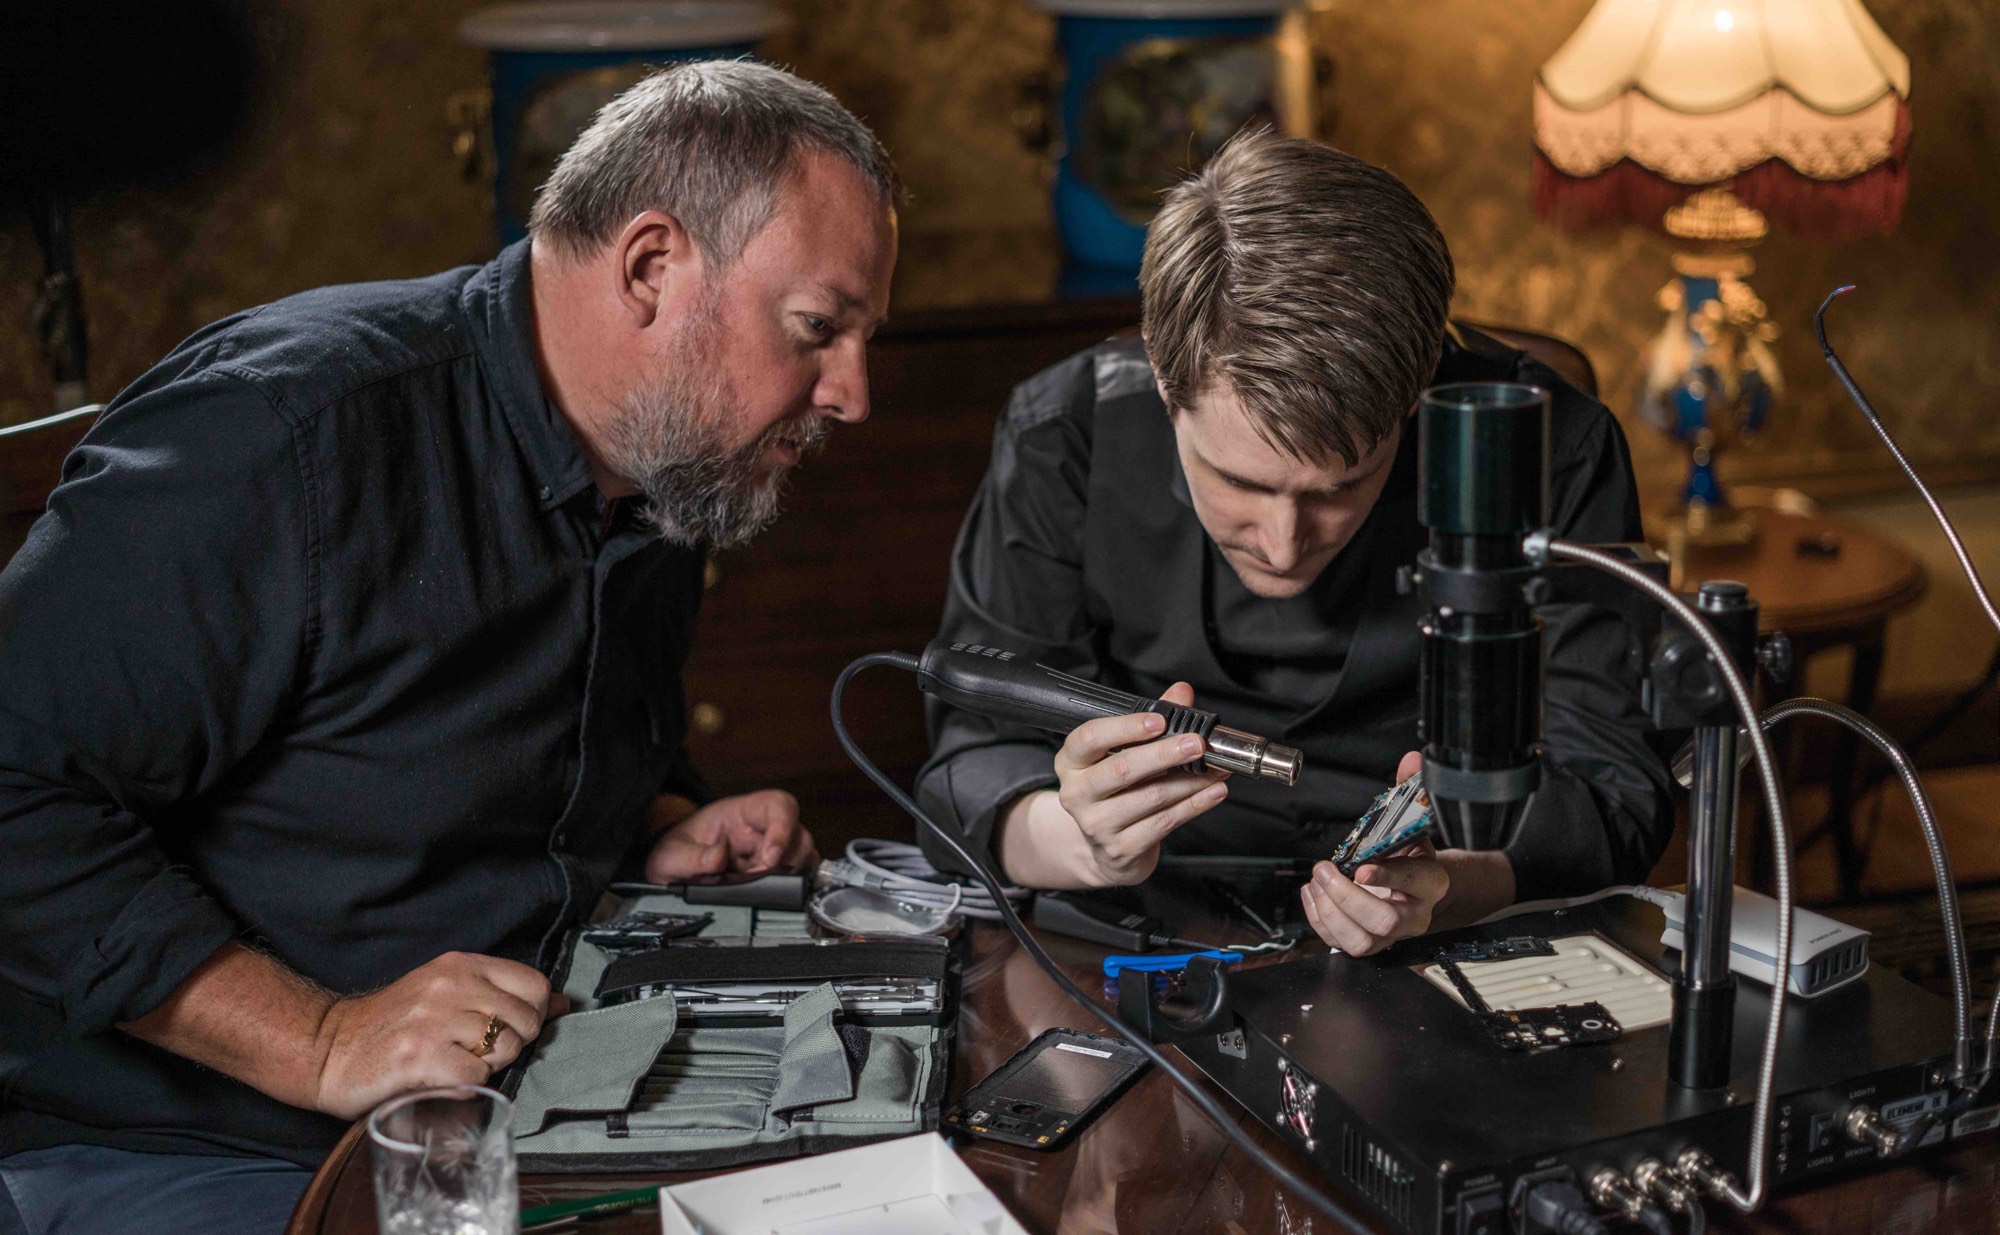 Edward Snowden shows VICE founder Shane Smith how to make a smartphone go black. Jake Burghart for VICE on HBO.